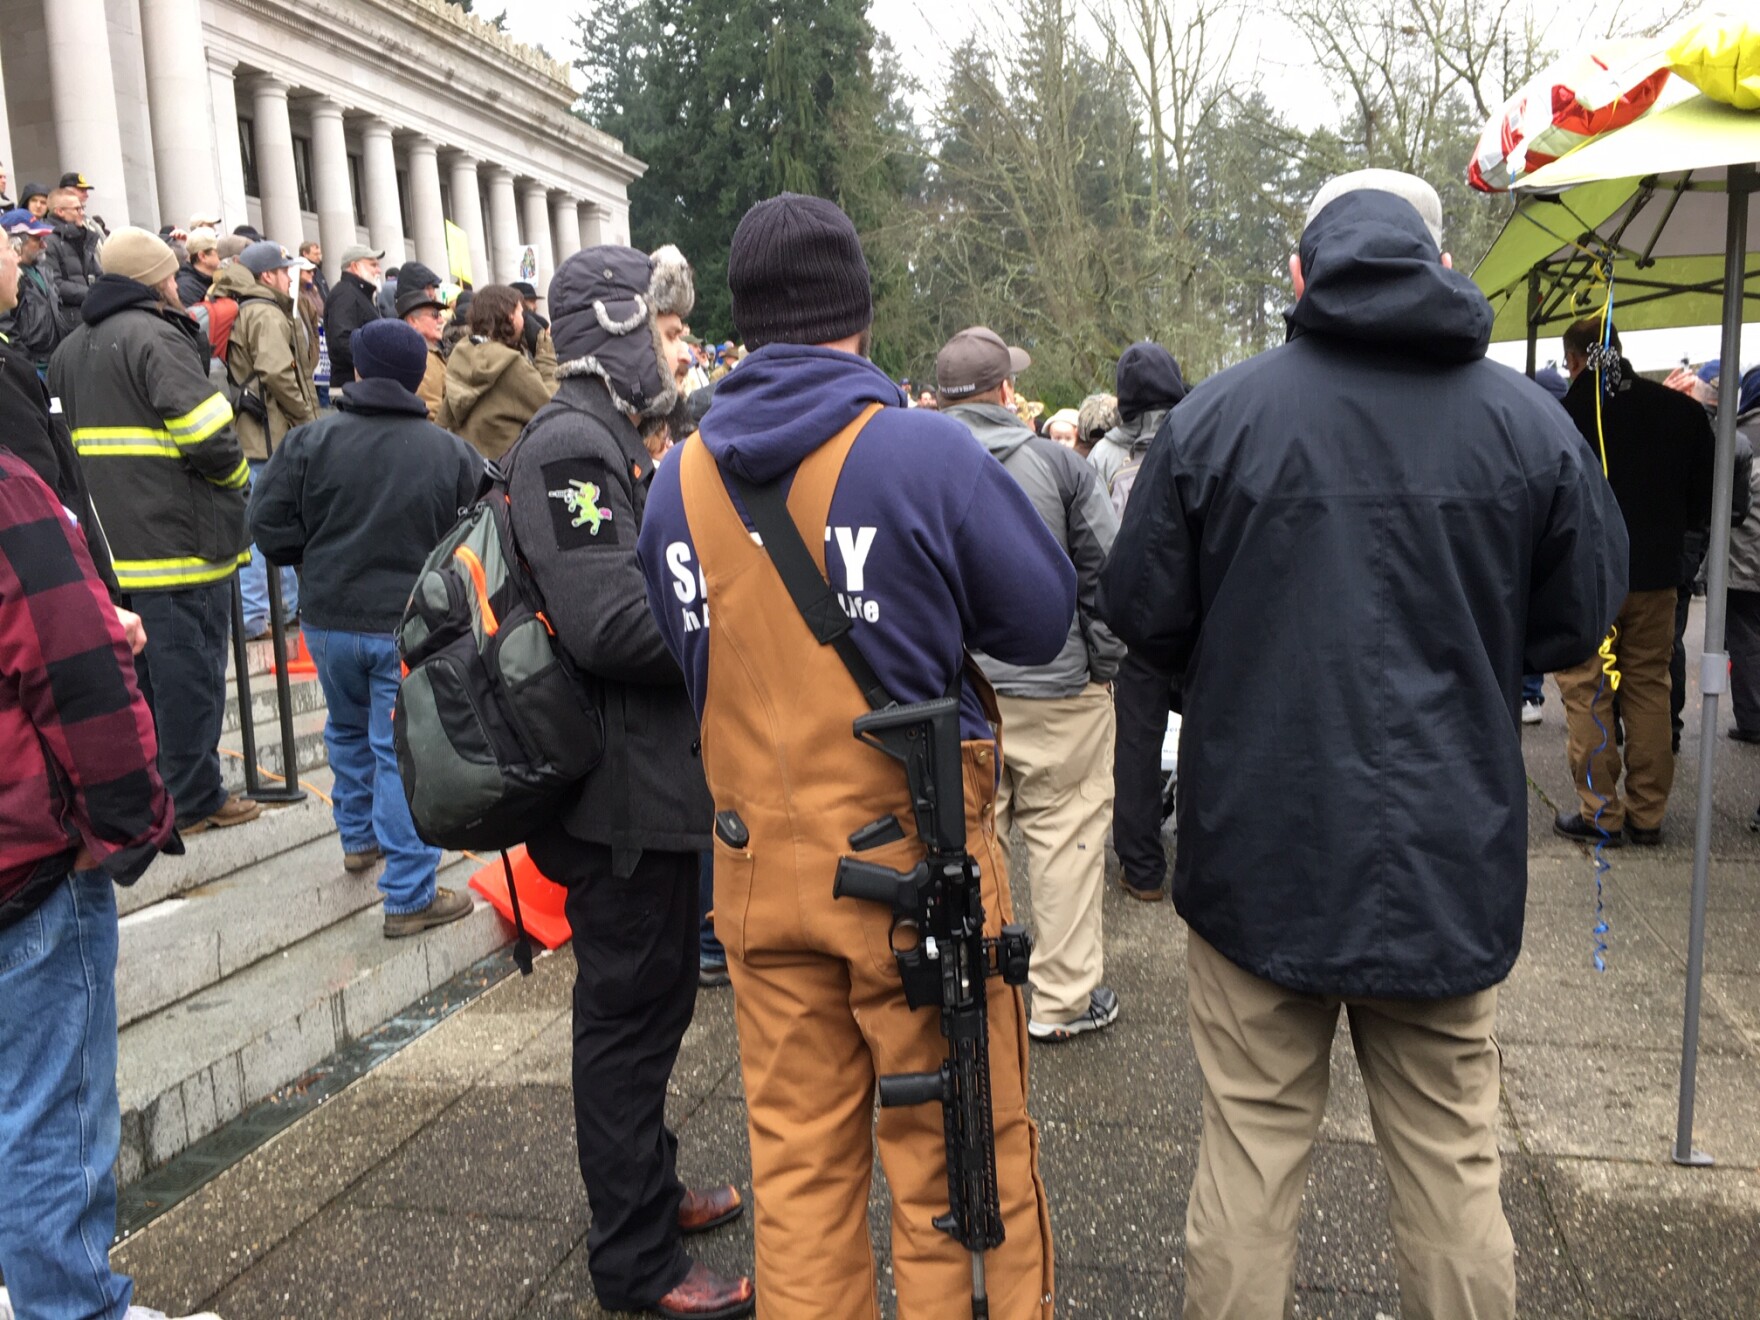 A law passed last year banned the open carry of firearms at the Washington state Capitol and at demonstrations anywhere in the state. Now, state lawmakers are considering restrictions on guns at school board and local government meetings, as well as at election-related locations.